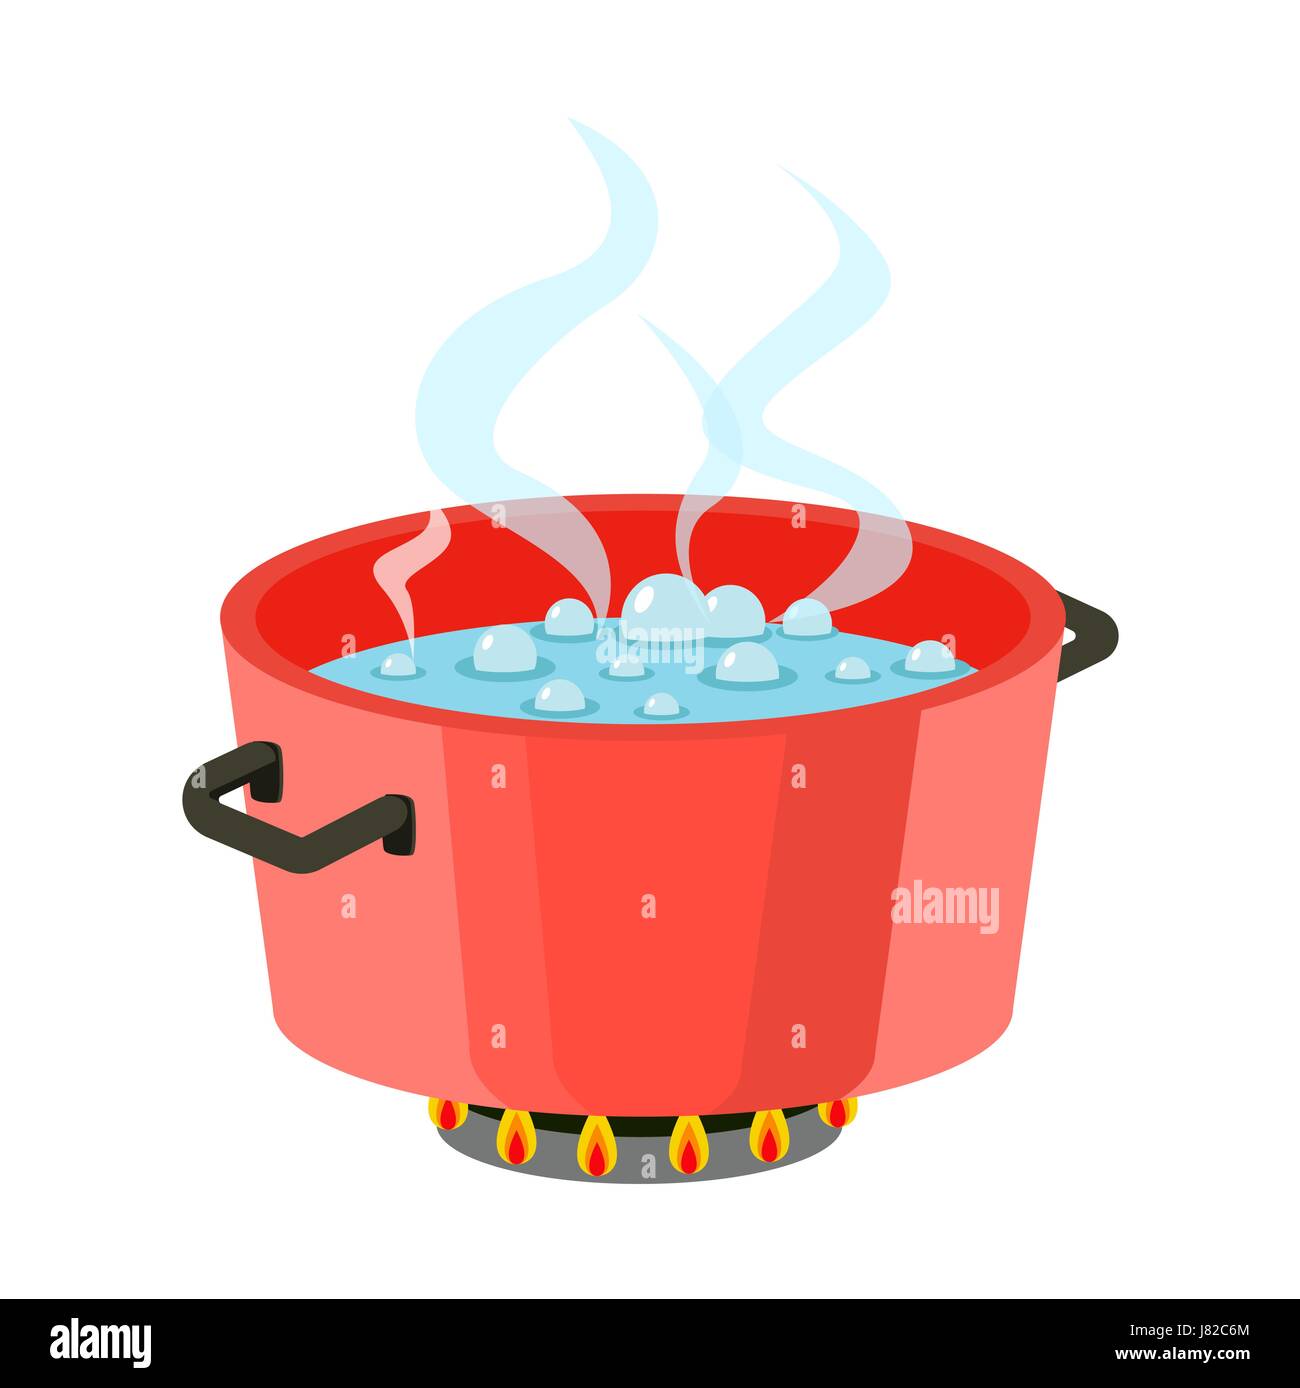 https://c8.alamy.com/comp/J82C6M/boiling-water-in-pan-red-cooking-pot-on-stove-with-water-and-steam-J82C6M.jpg